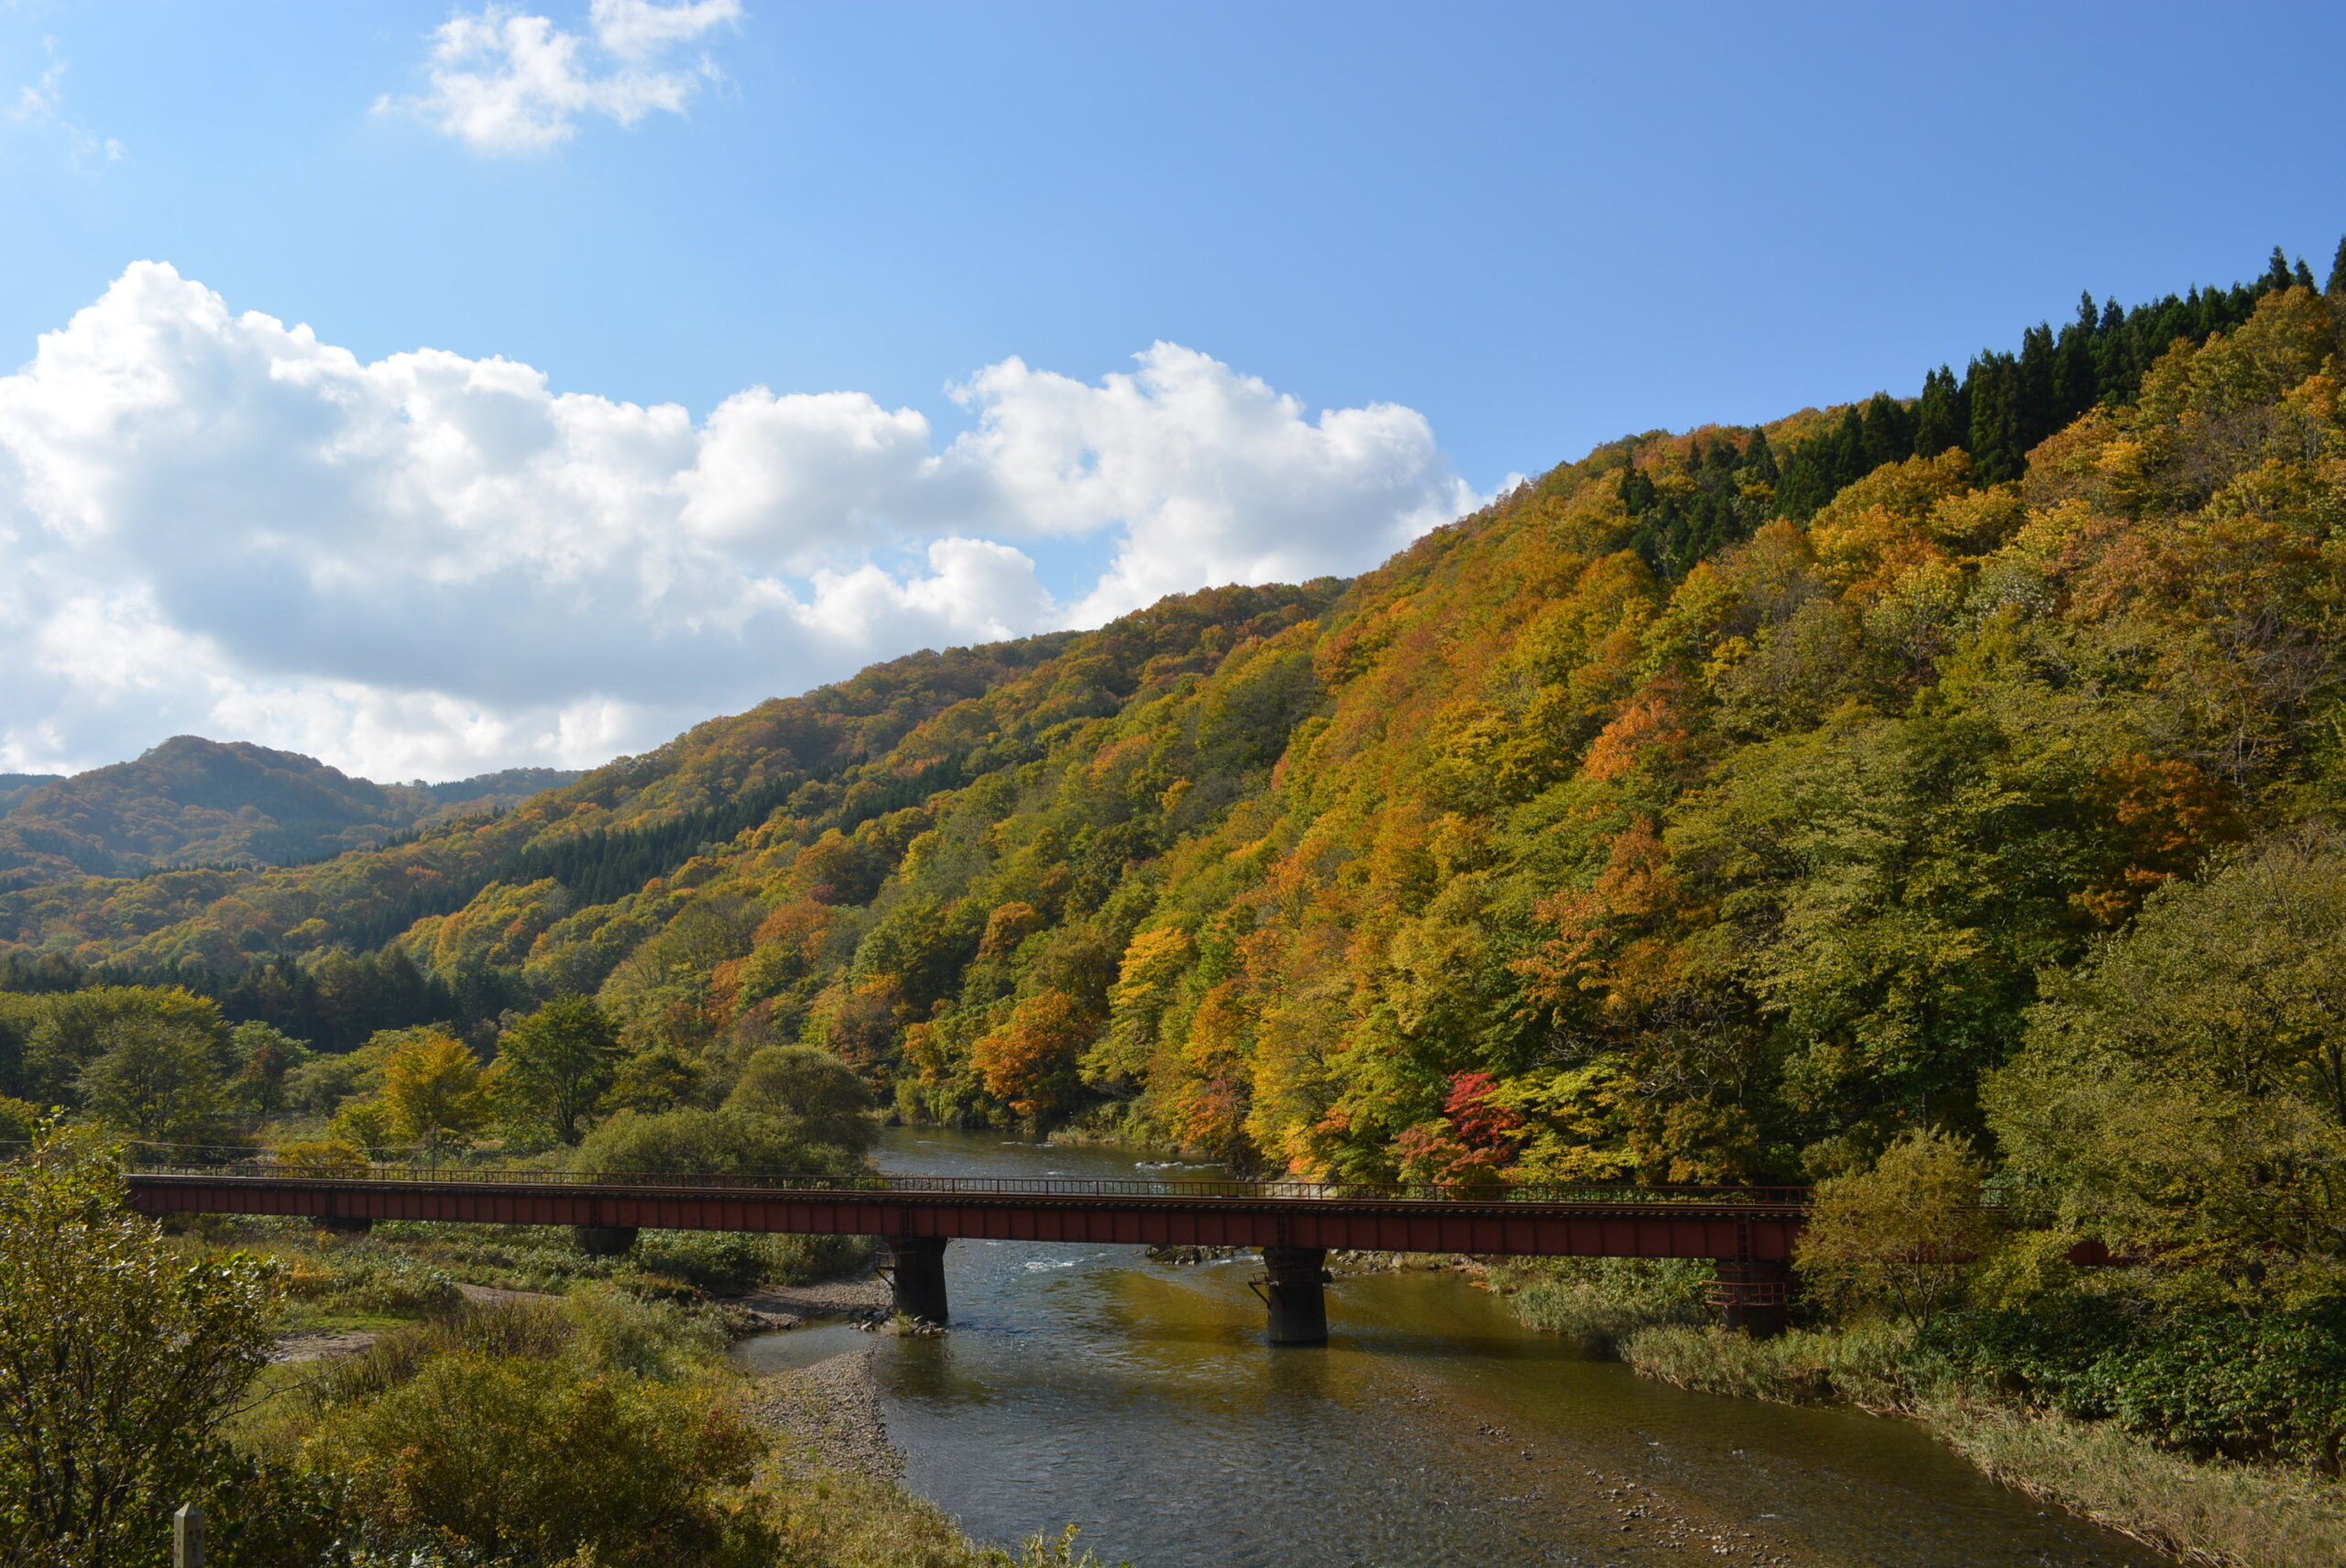 Explosions of Autumn Colors Await in the Yunotai Region